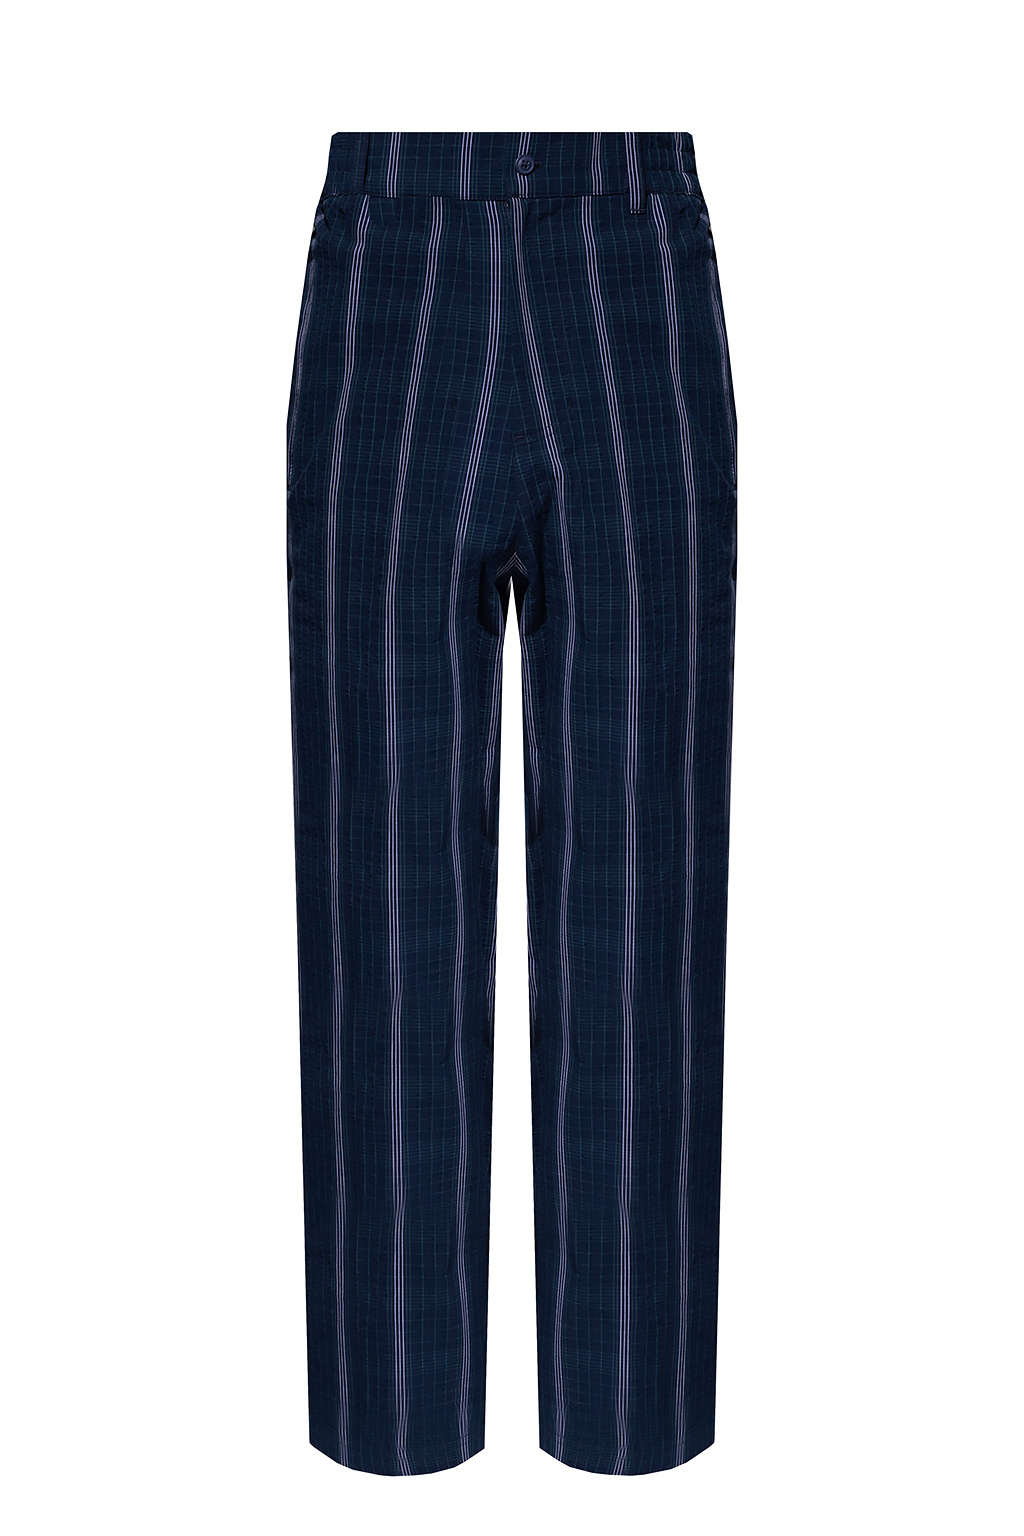 ADIDAS Originals Patterned trousers